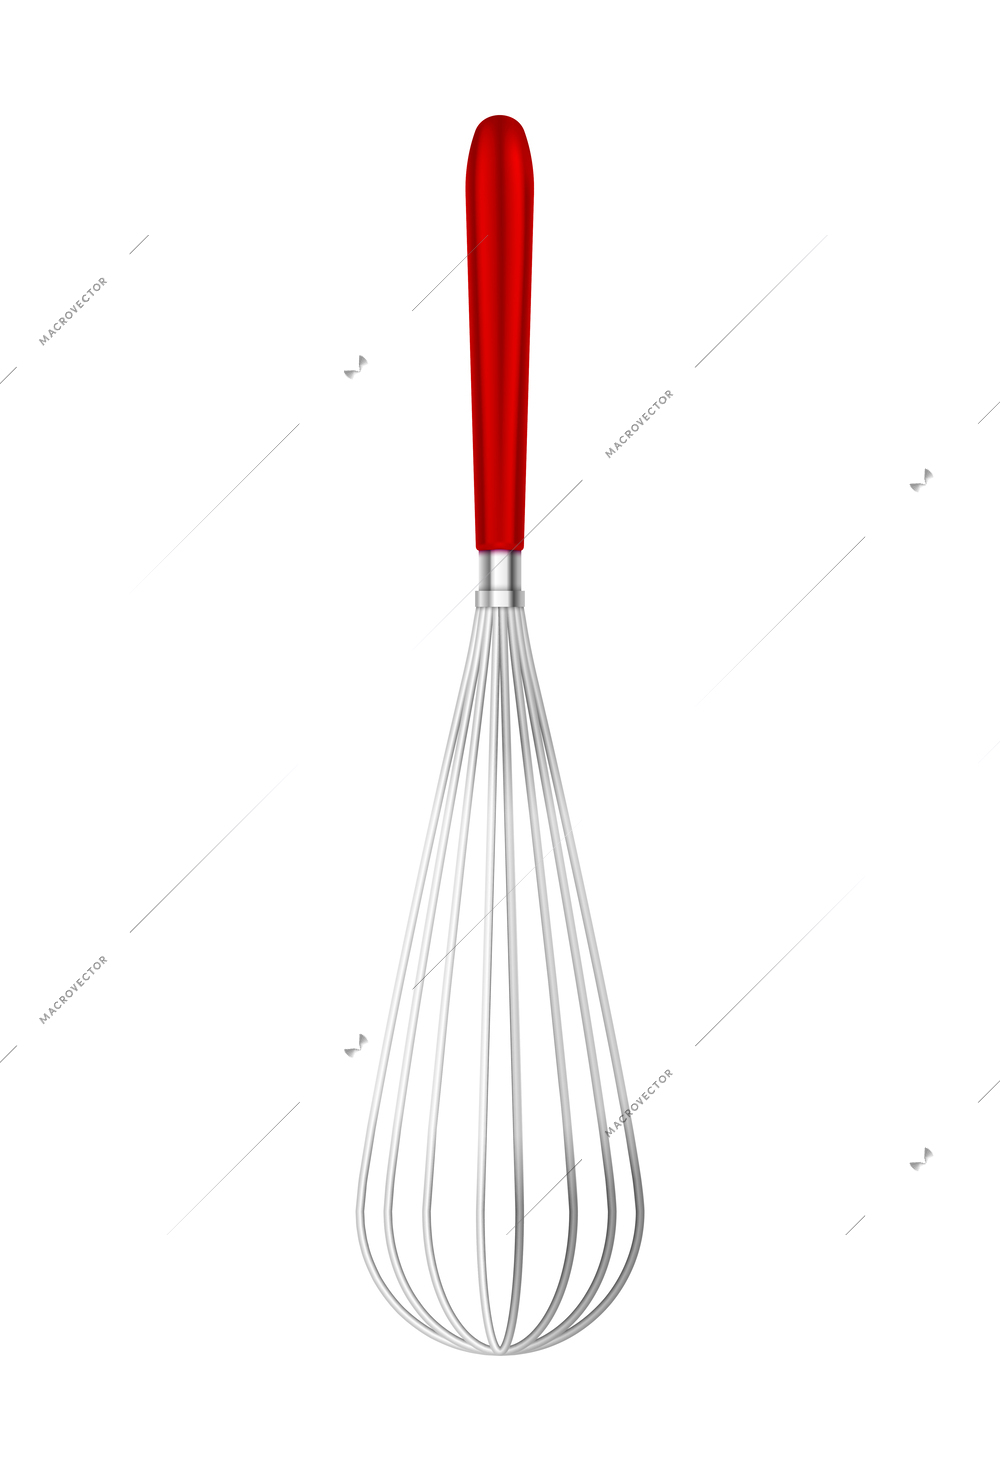 Cooking tools plastic realistic composition with isolated image of single kitchen utensil on blank background vector illustration